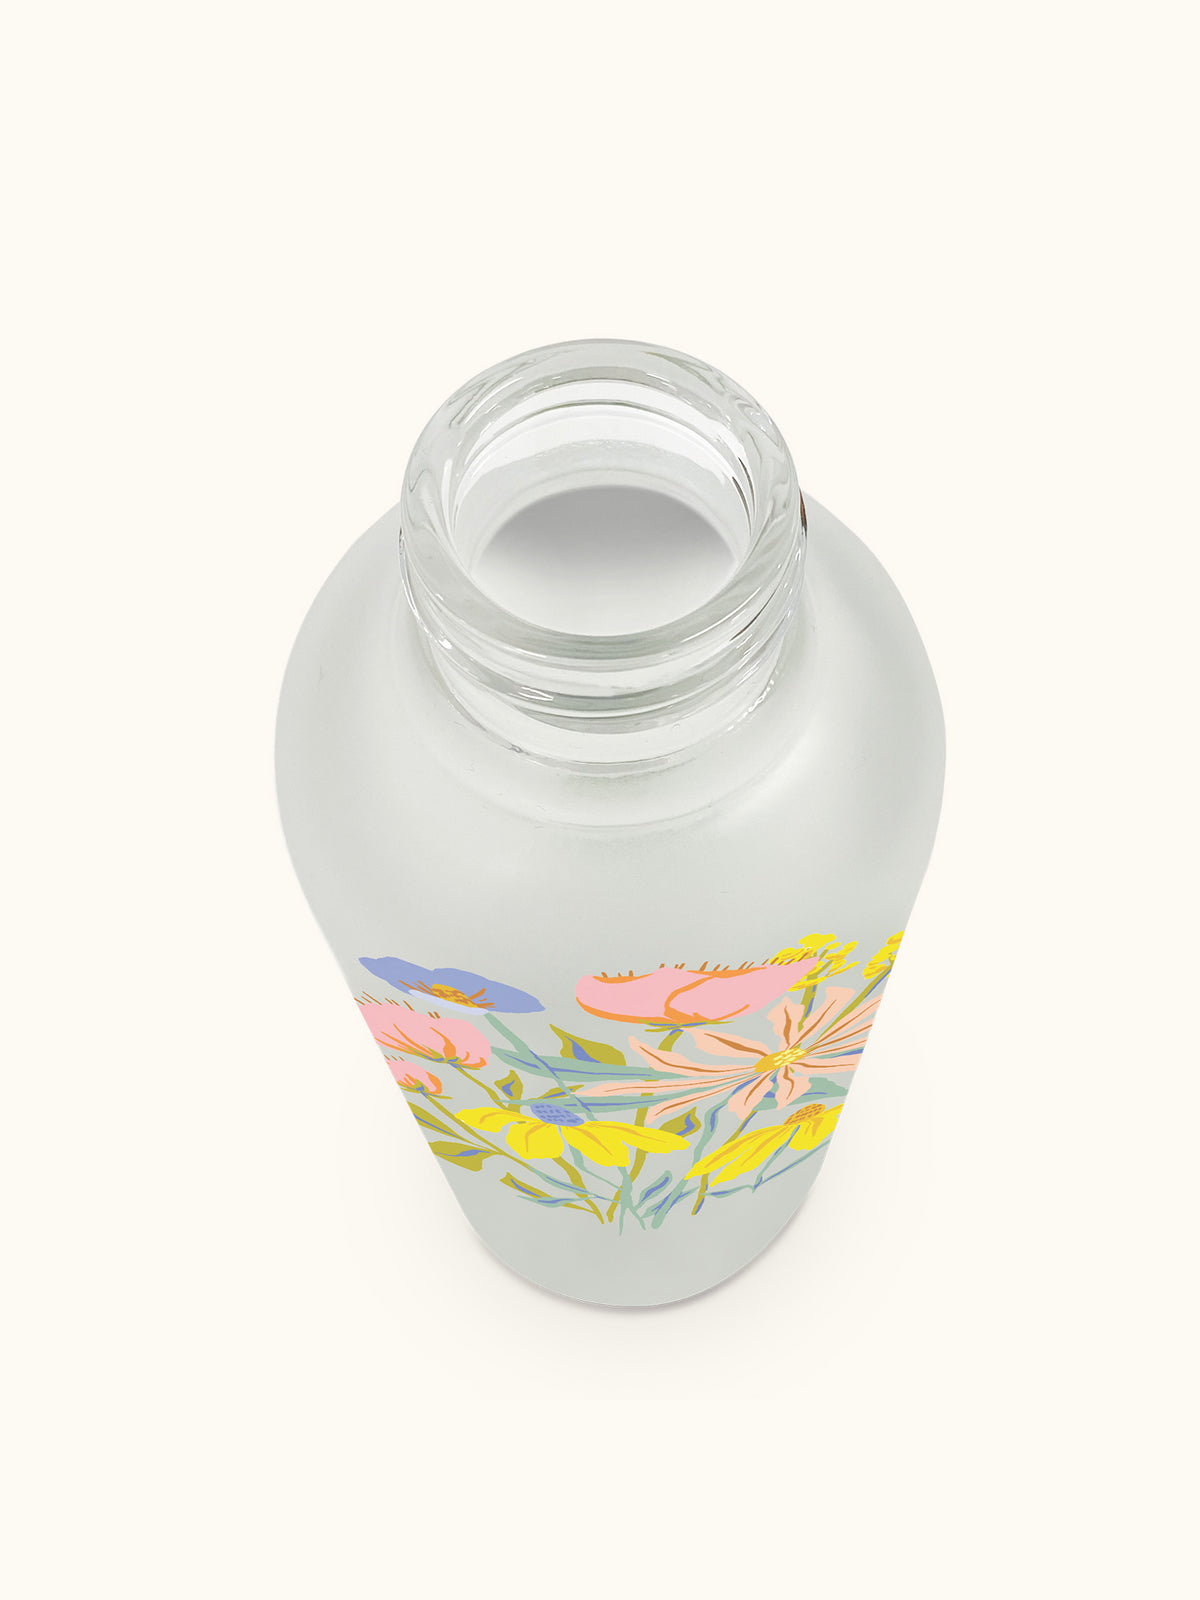 Spring Time Blooms Glass Water Bottle with Straw